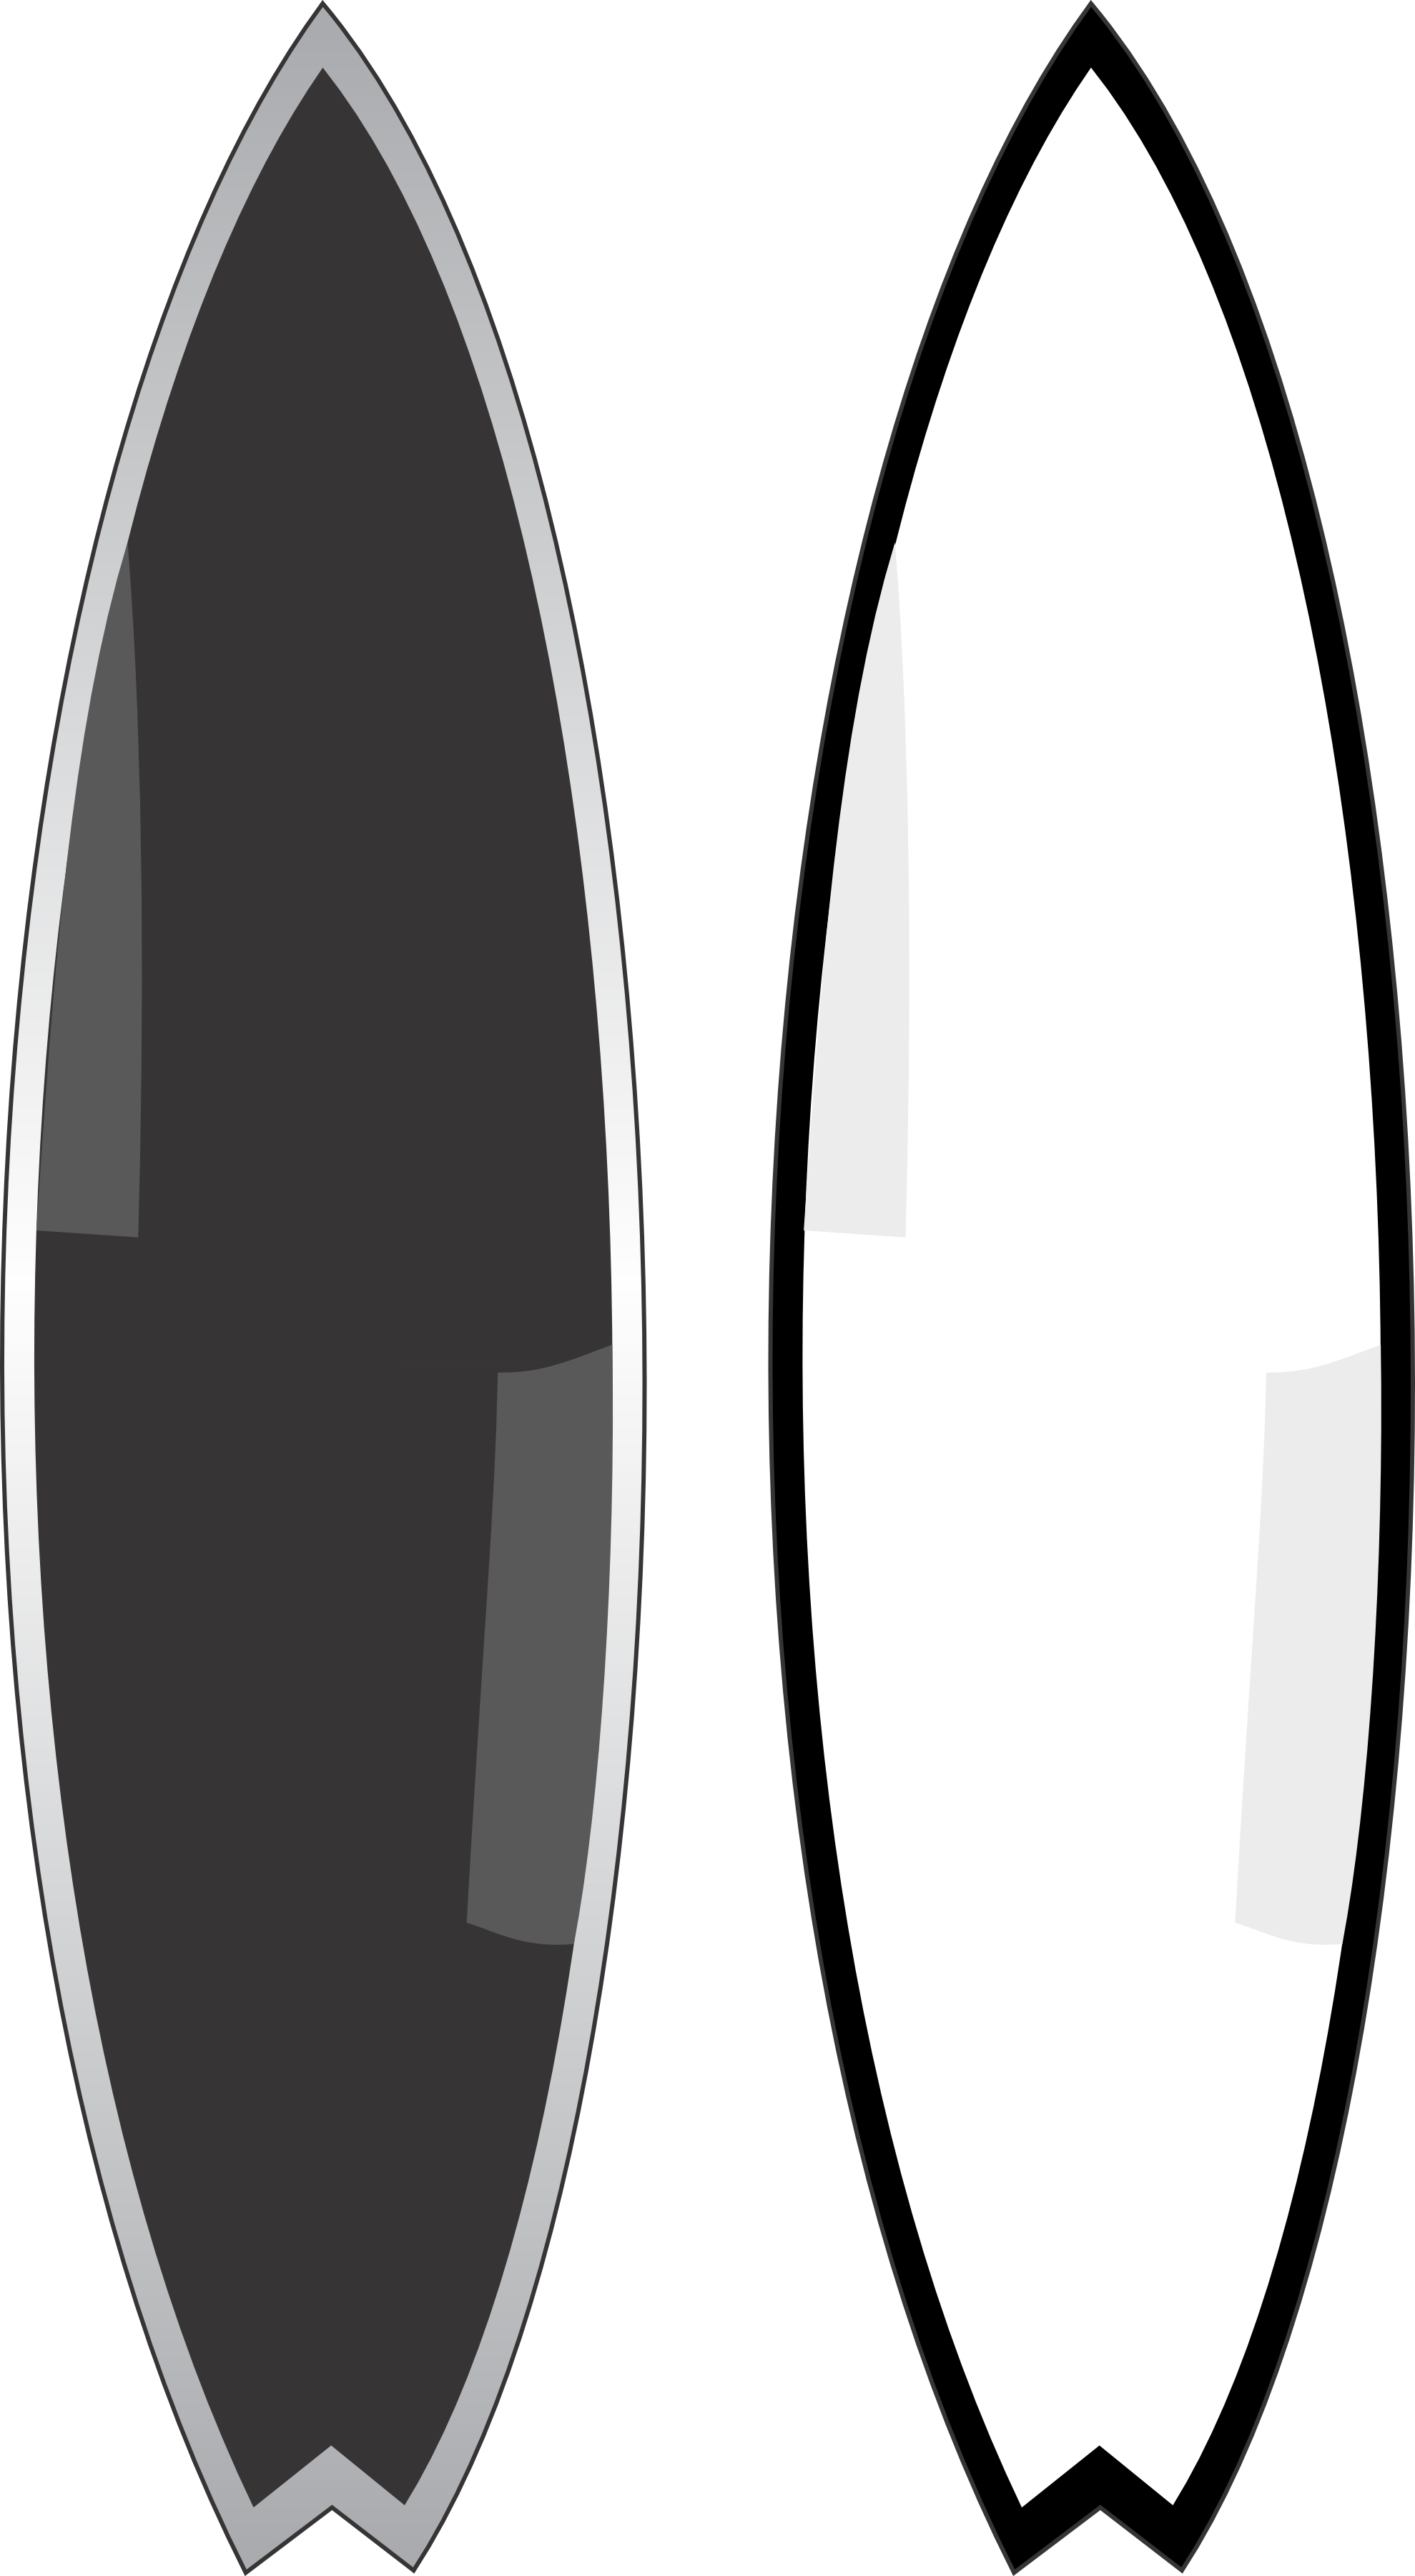 Templates pencil and in. White clipart surfboard